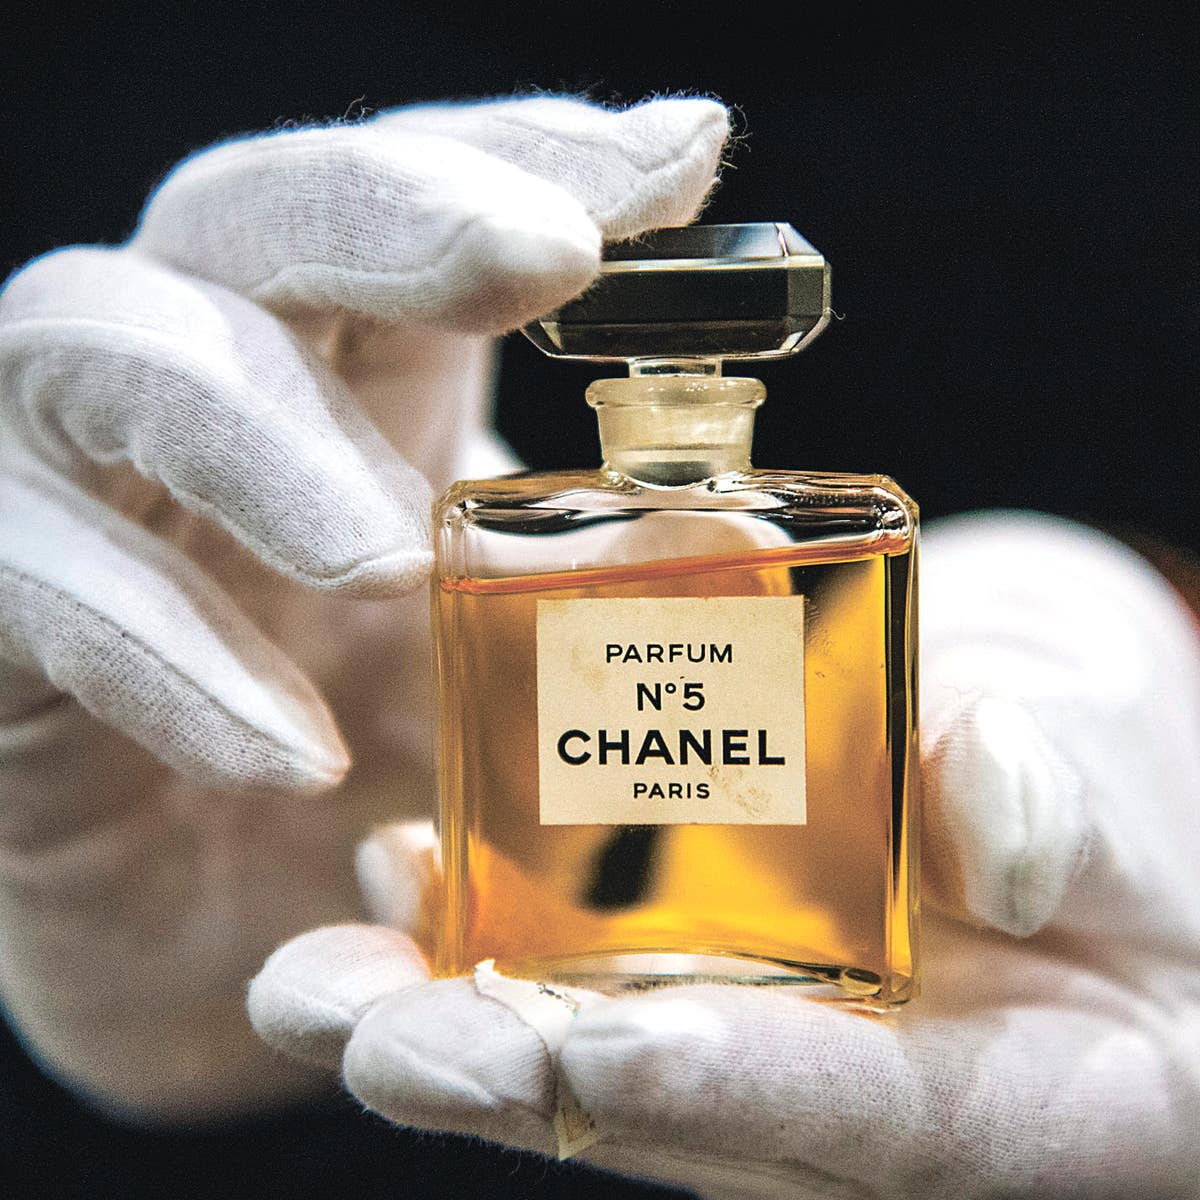 5 Fascinating Facts About the Visionary Behind Chanel No. 5